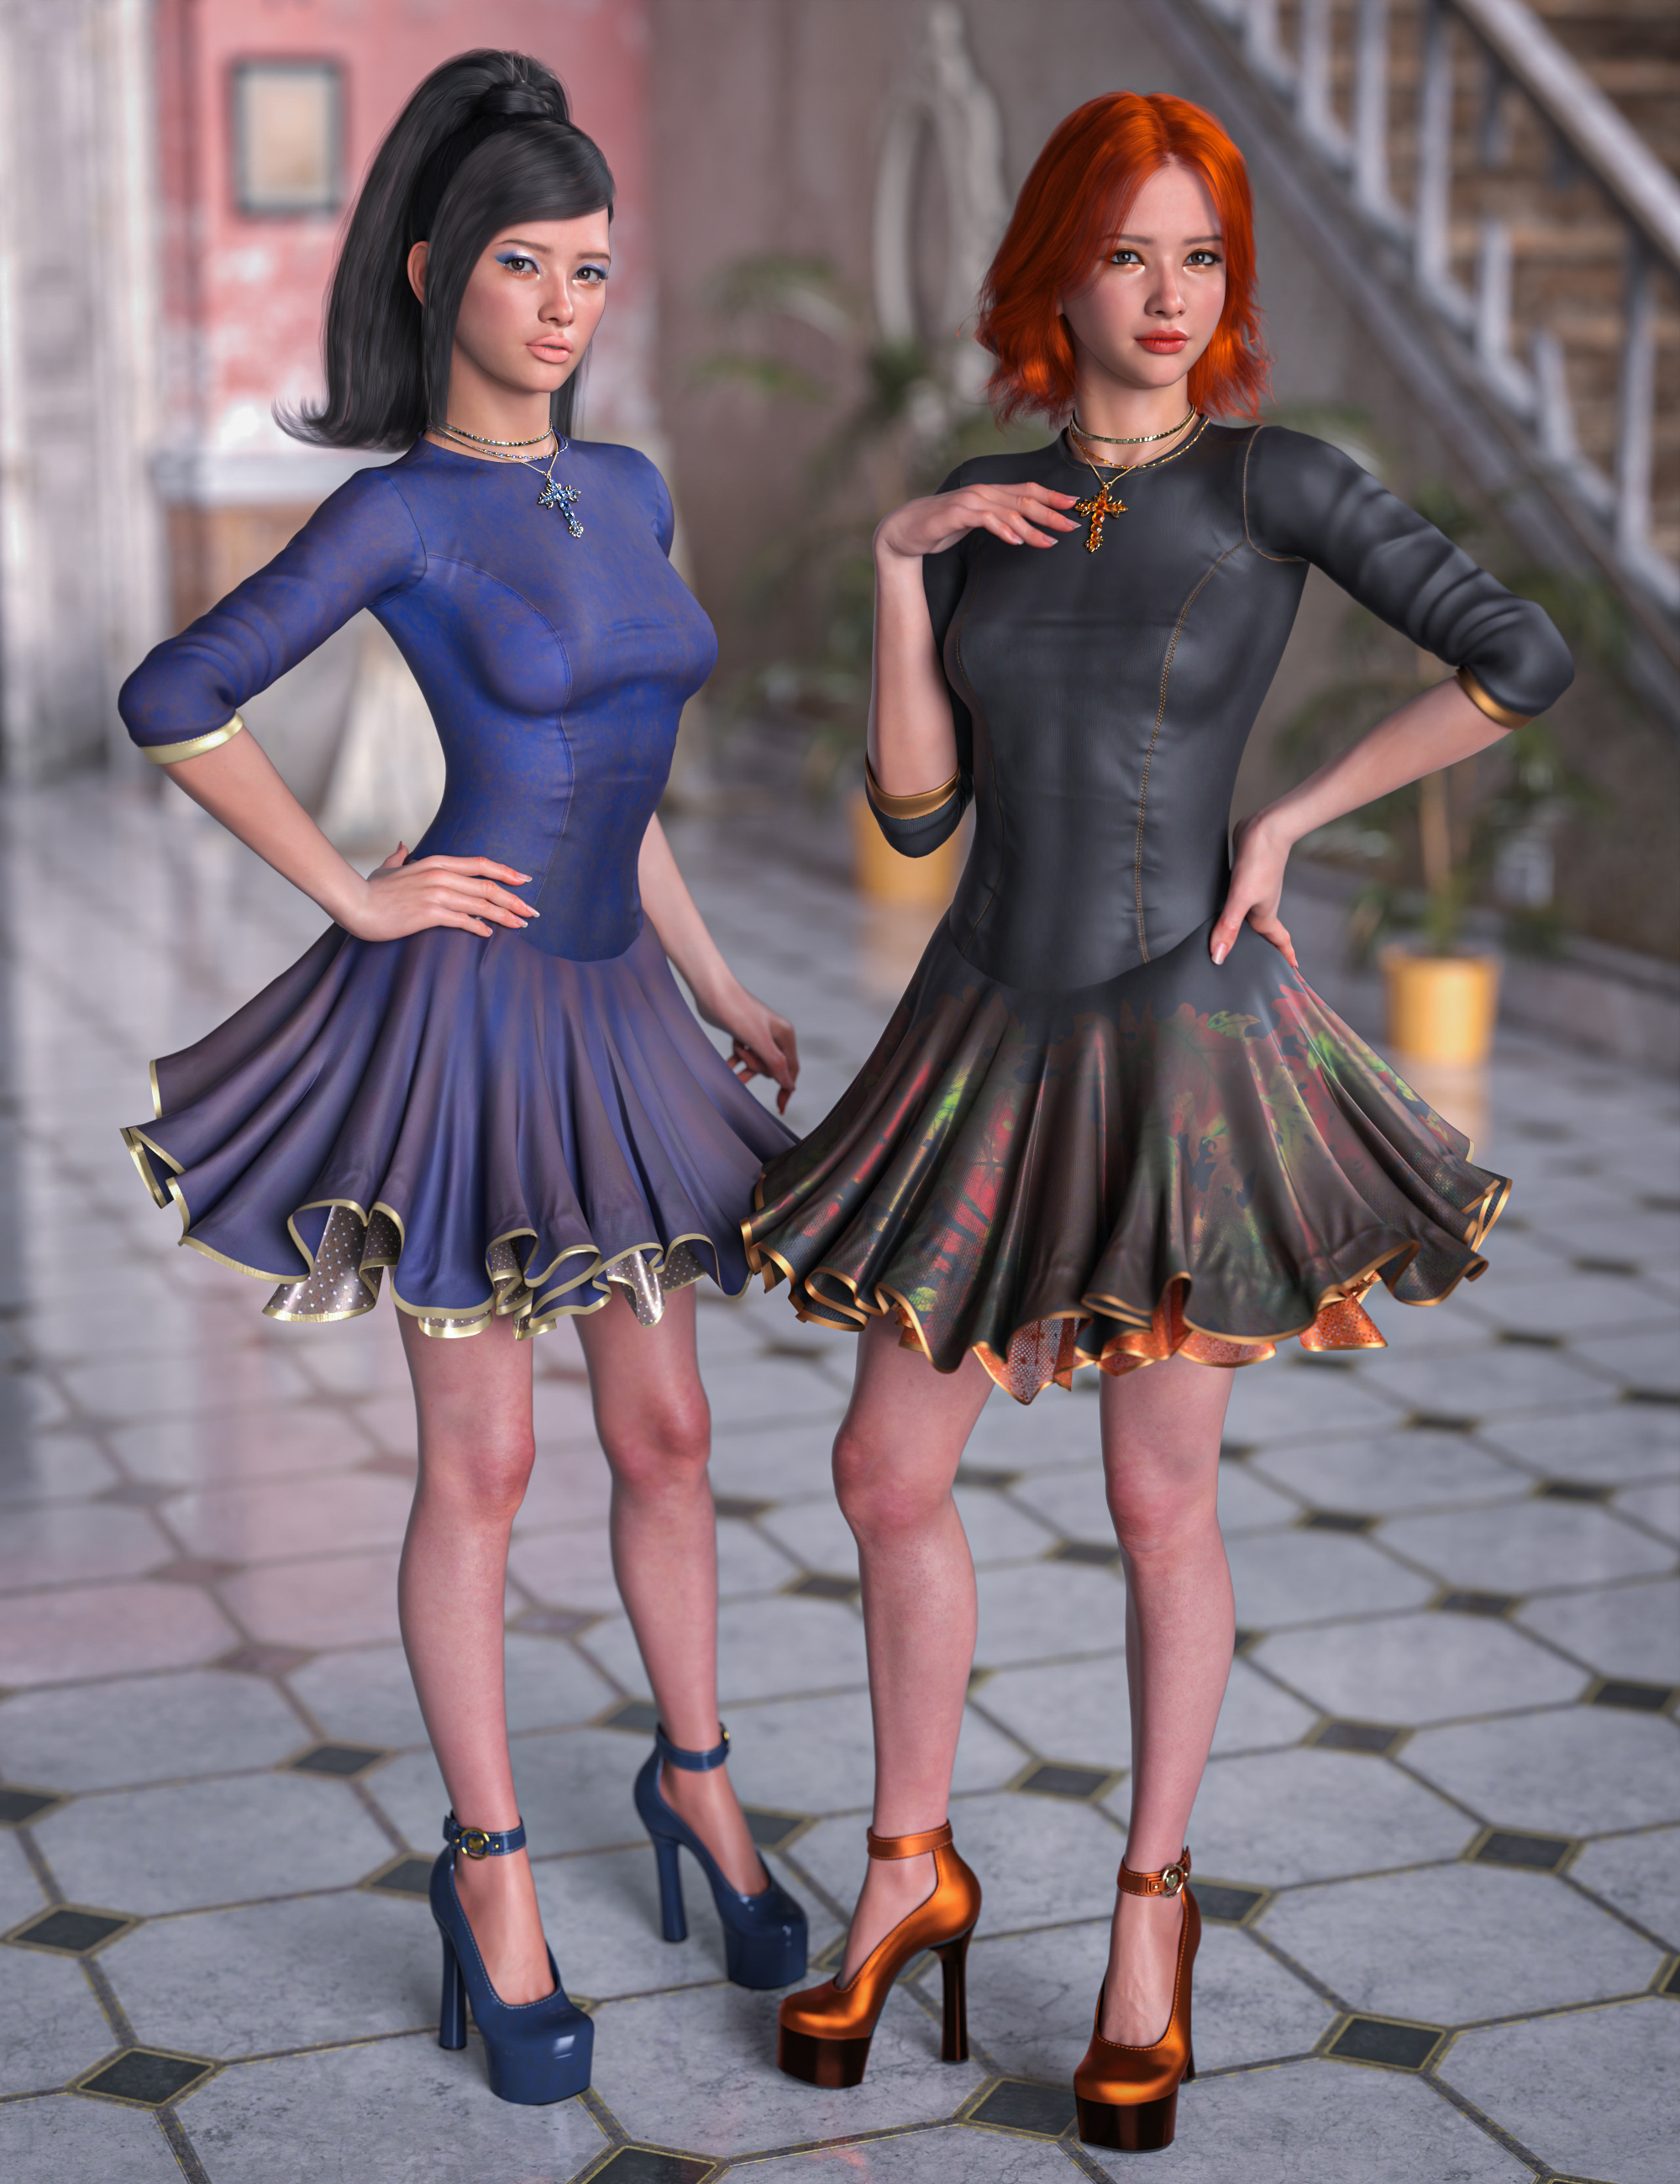 Kuro Outfit Texture Add-On by: Mada, 3D Models by Daz 3D